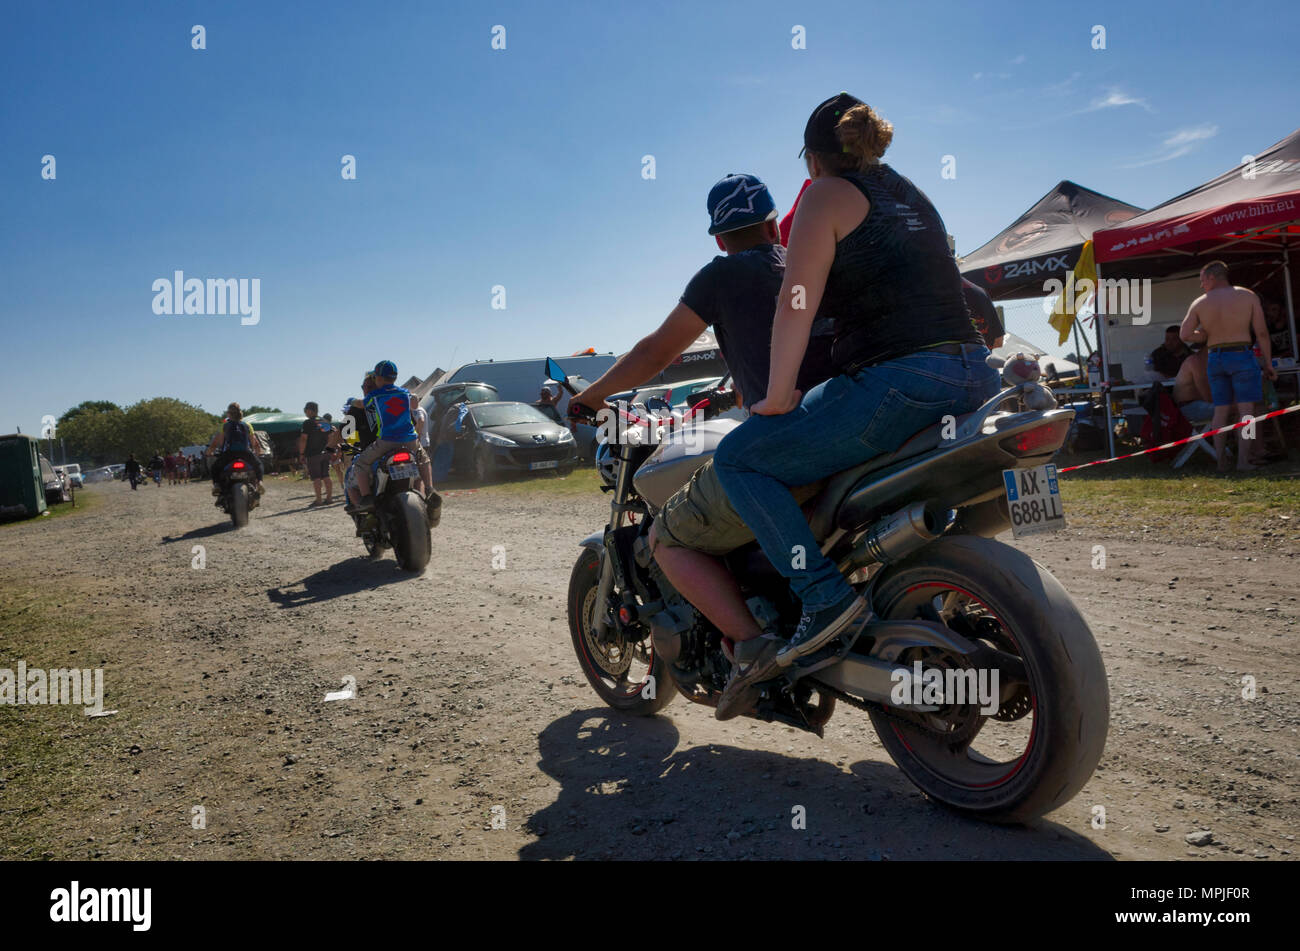 19-20th May 2018. Le Mans, France.  Behind the scenes at the MotoGP.  Campers motorcycling around the campsite on the motorcycles, where there's no need to worry about wearing crash helmets. Stock Photo